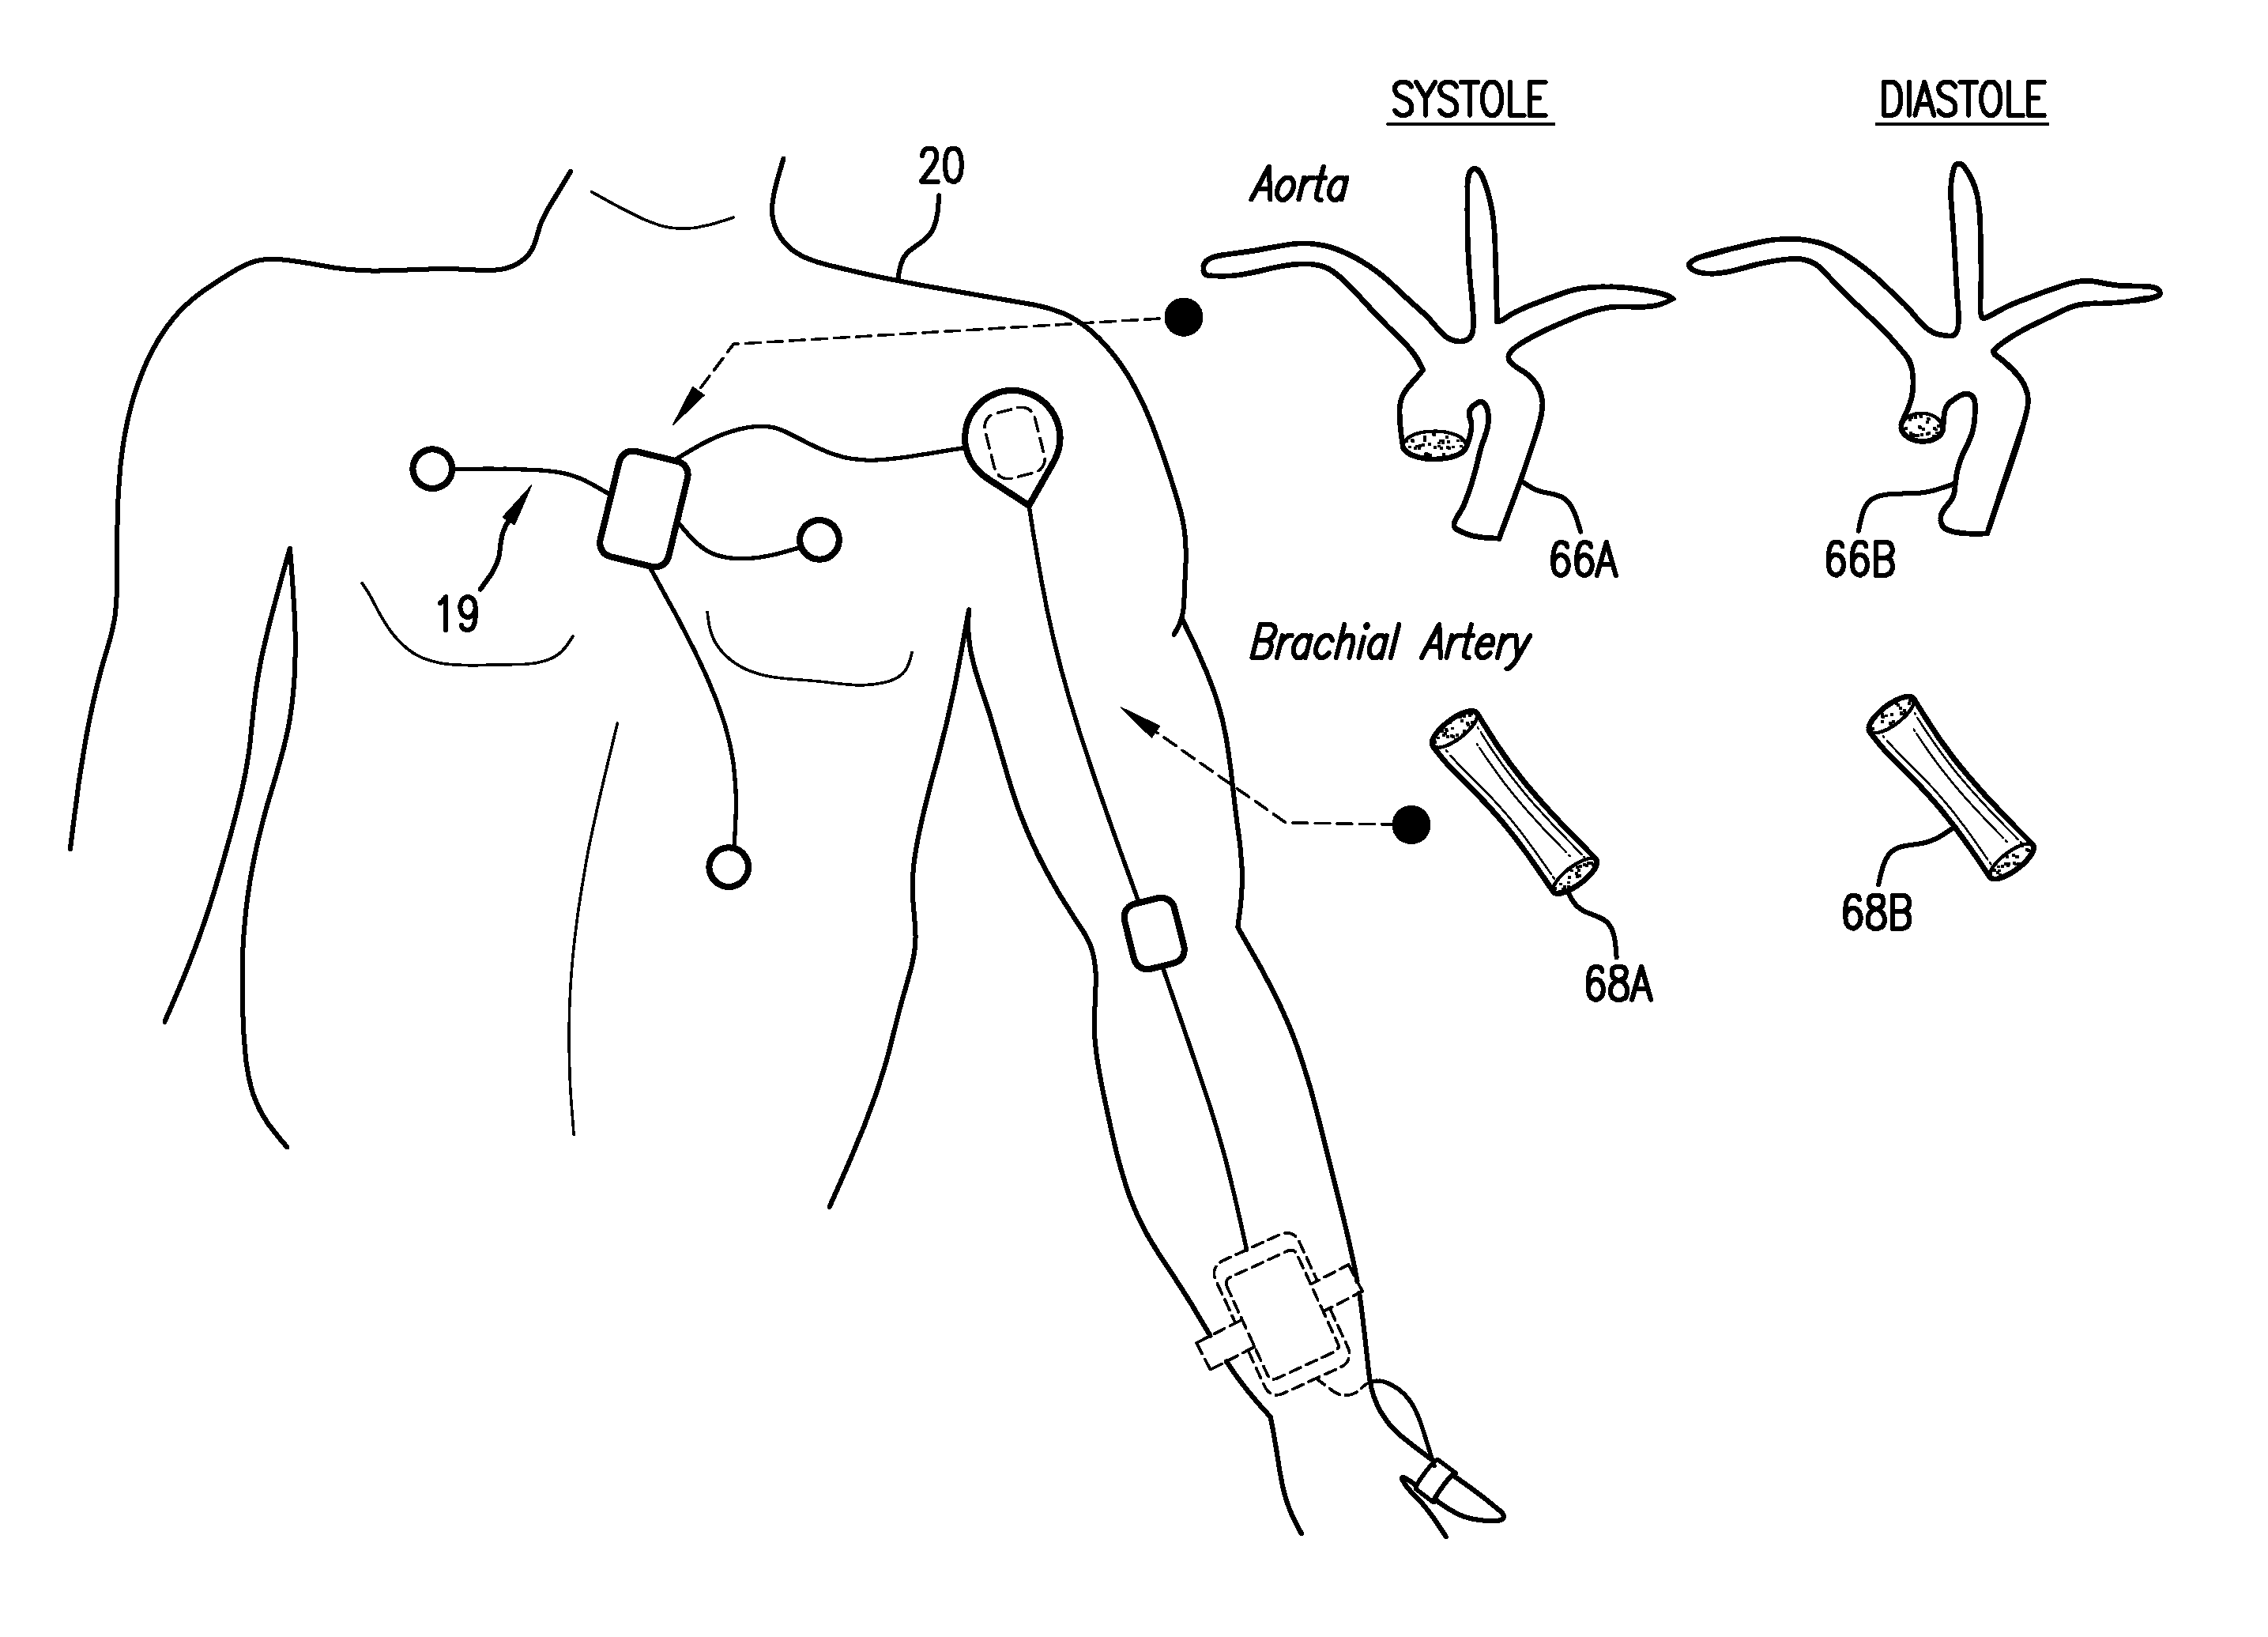 Body-worn system for continuous, noninvasive measurement of cardiac output, stroke volume, cardiac power, and blood pressure